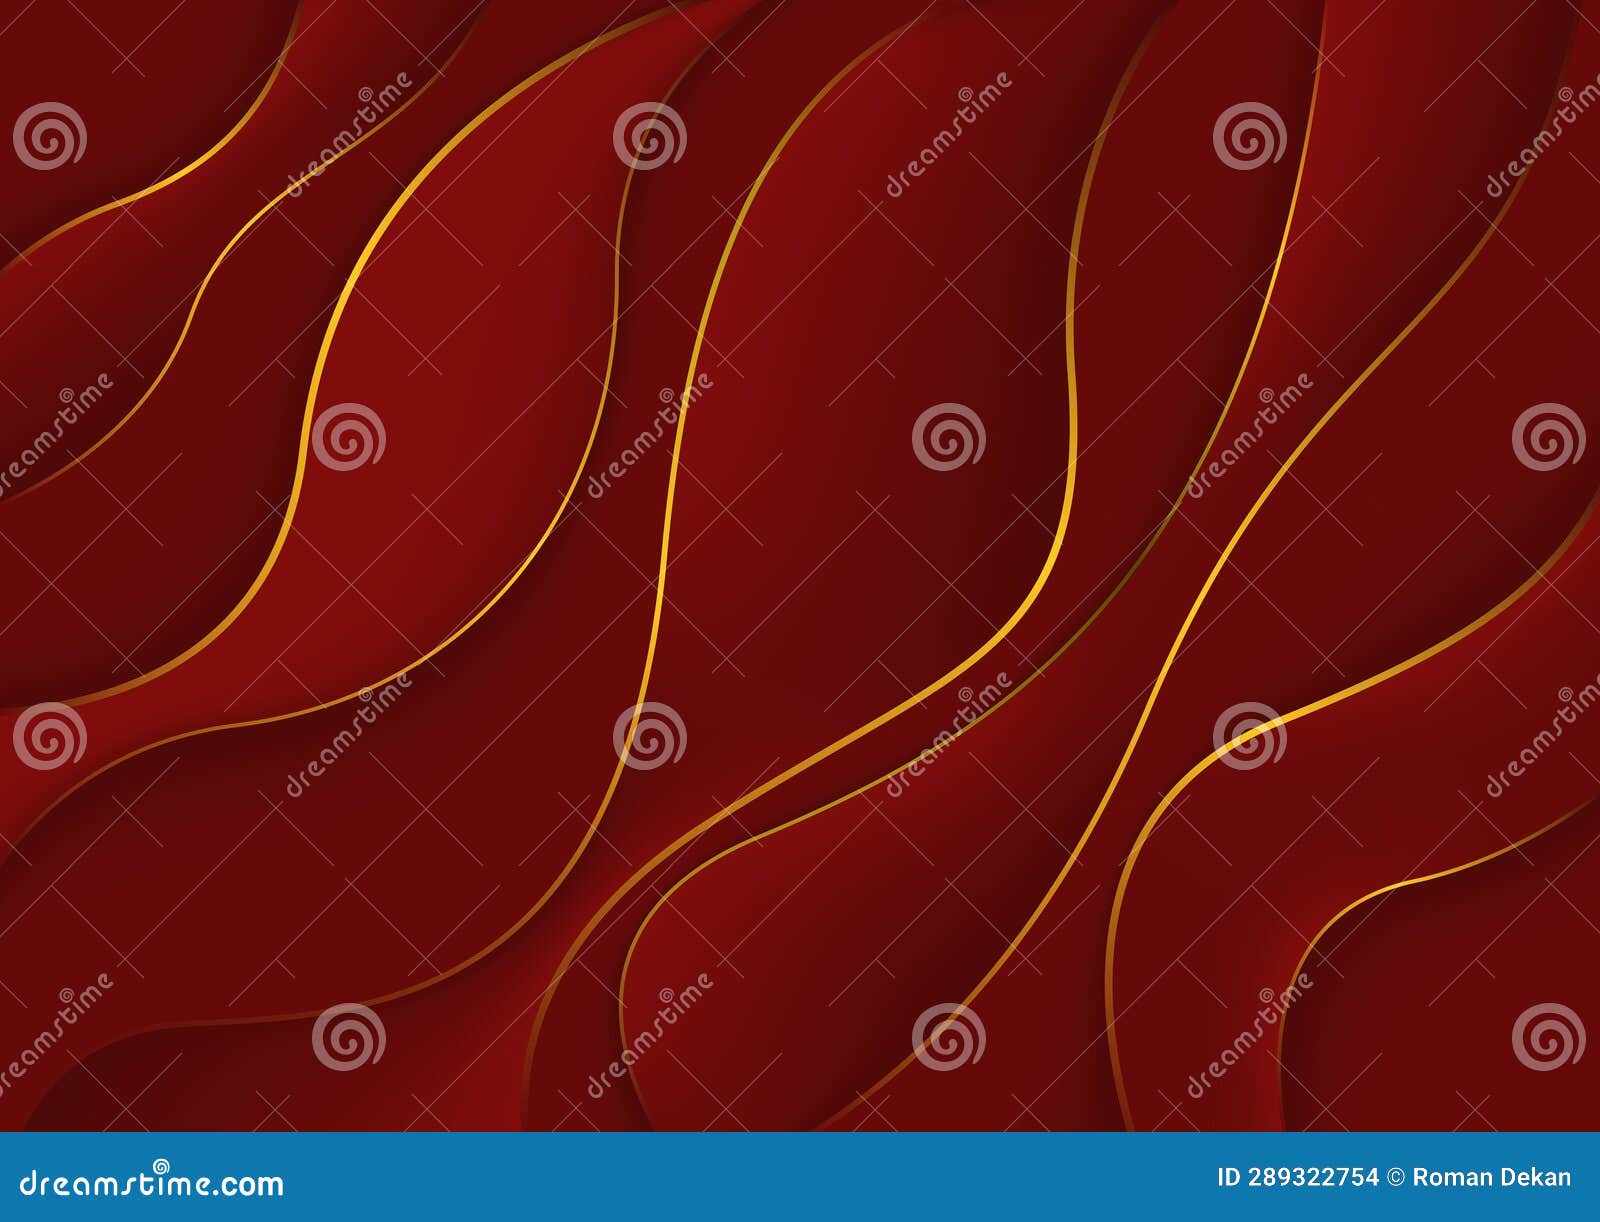 Red Flowing Waves with Golden Decorative Lines Stock Illustration ...